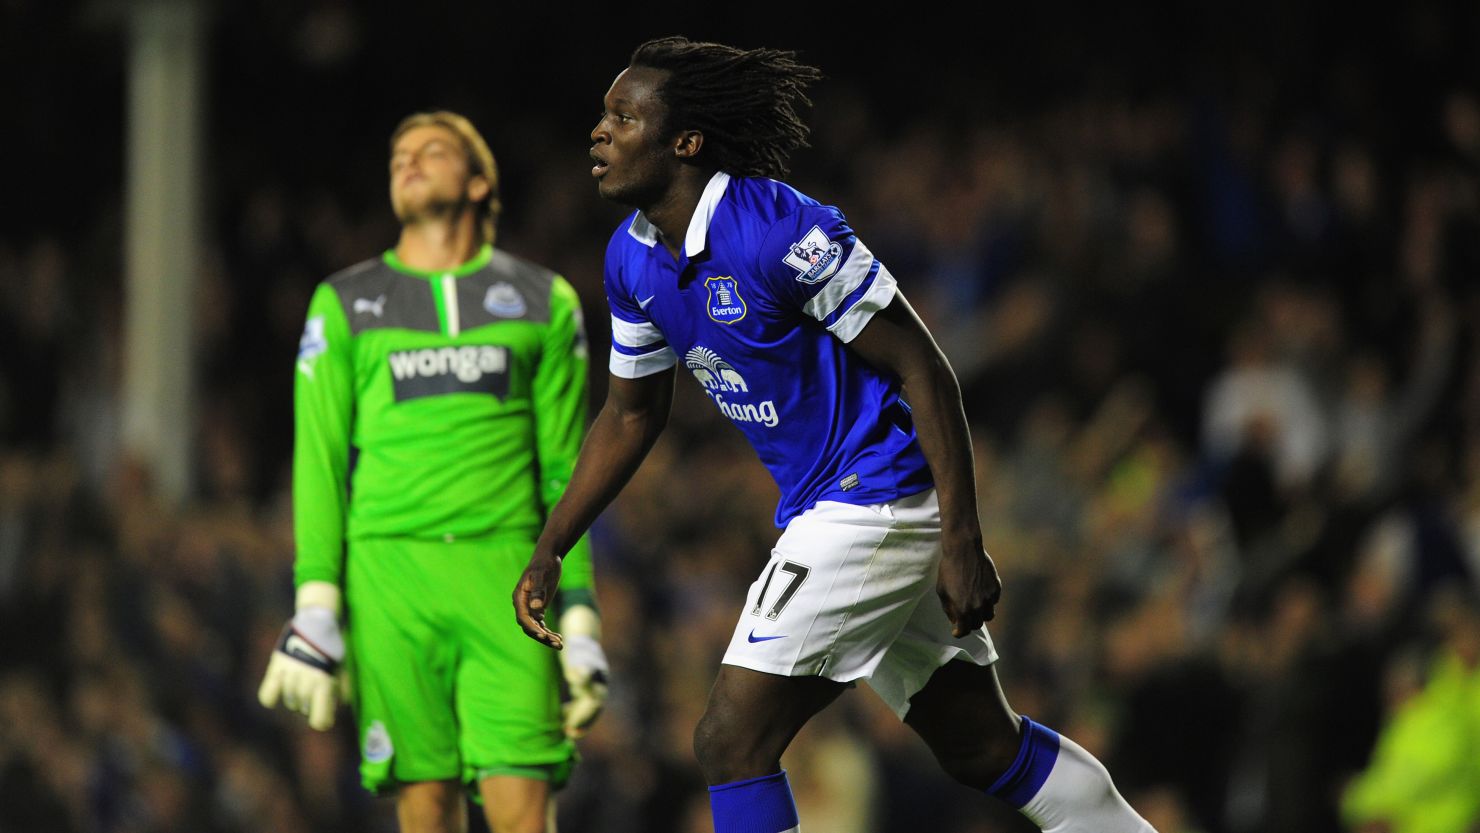 Romelu Lukaku celebrates as Newcastle keeper Tim Krul reacts after the striker pounces for a second goal for Everton